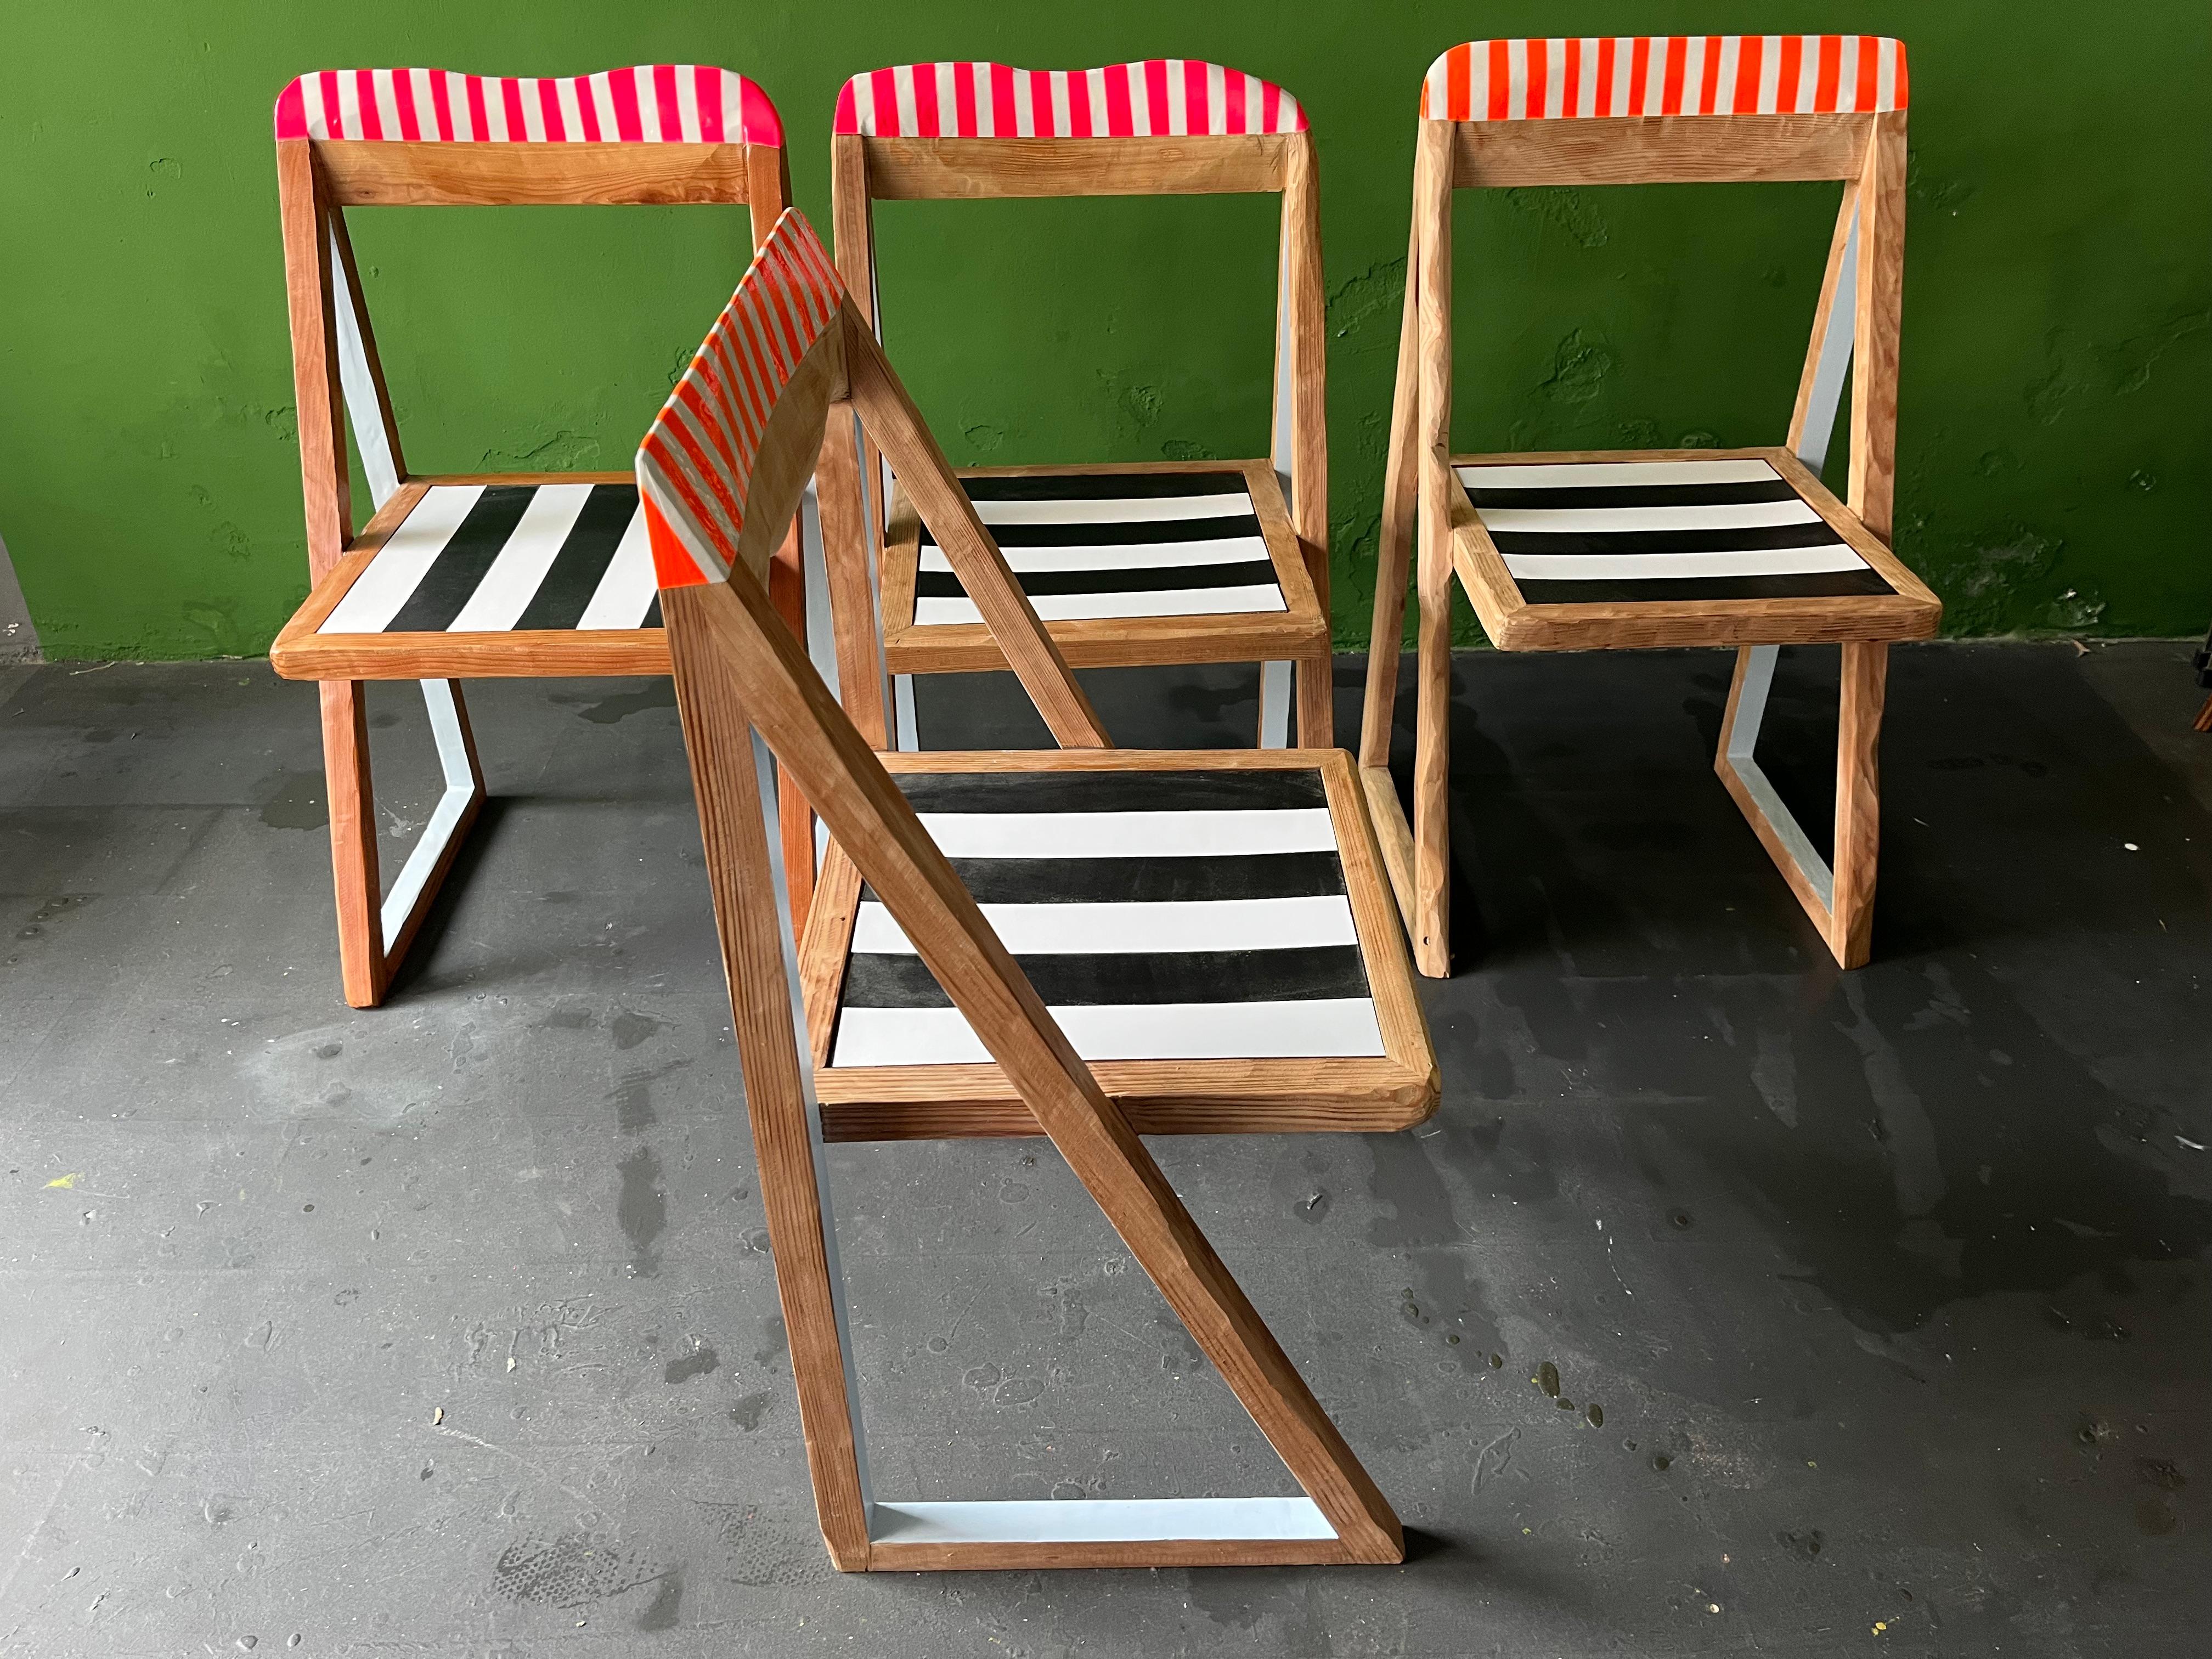 These 80's triangle chairs where re-shaped, colored in neon and white, multilacquered, black and white leather strips on the seat. A perfect example of Staabs funktional art pieces. 
Through my work I transform each chair into a unique and